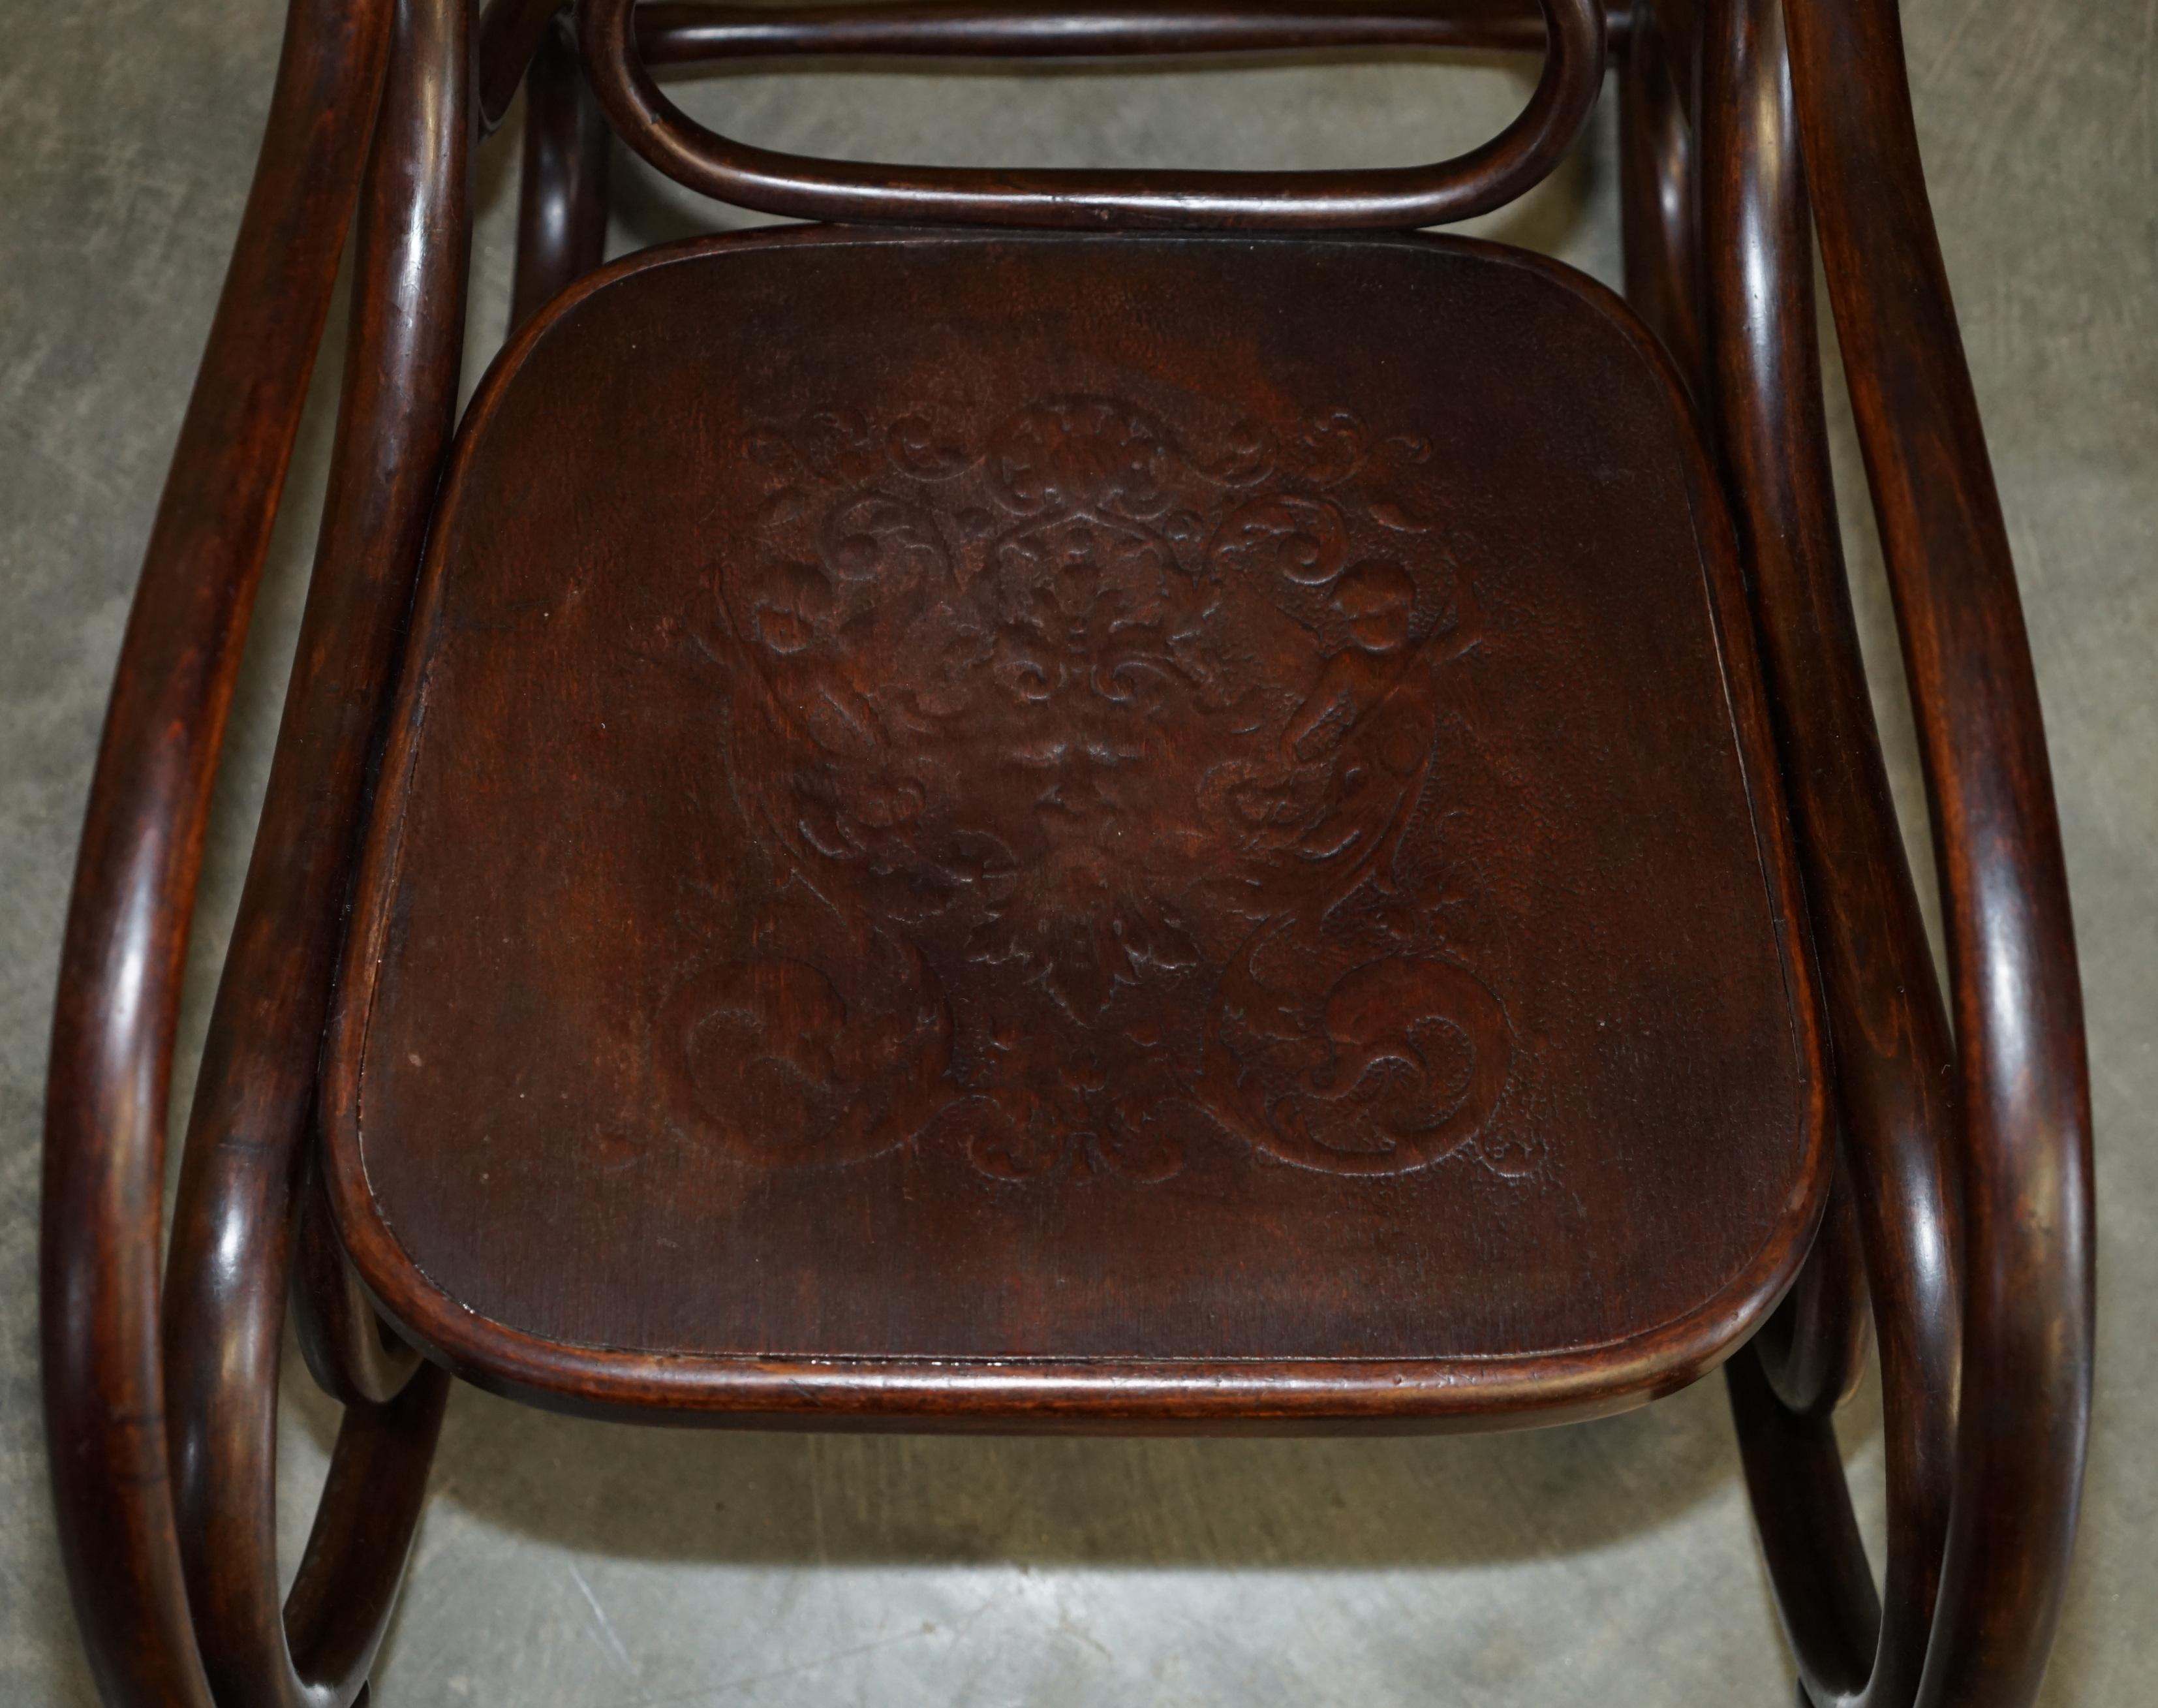 EXQUISITE ViCTORIAN THONET ROCKING CHAIR WITH CHERUB CARVED BACK & SEAT PANELS For Sale 1